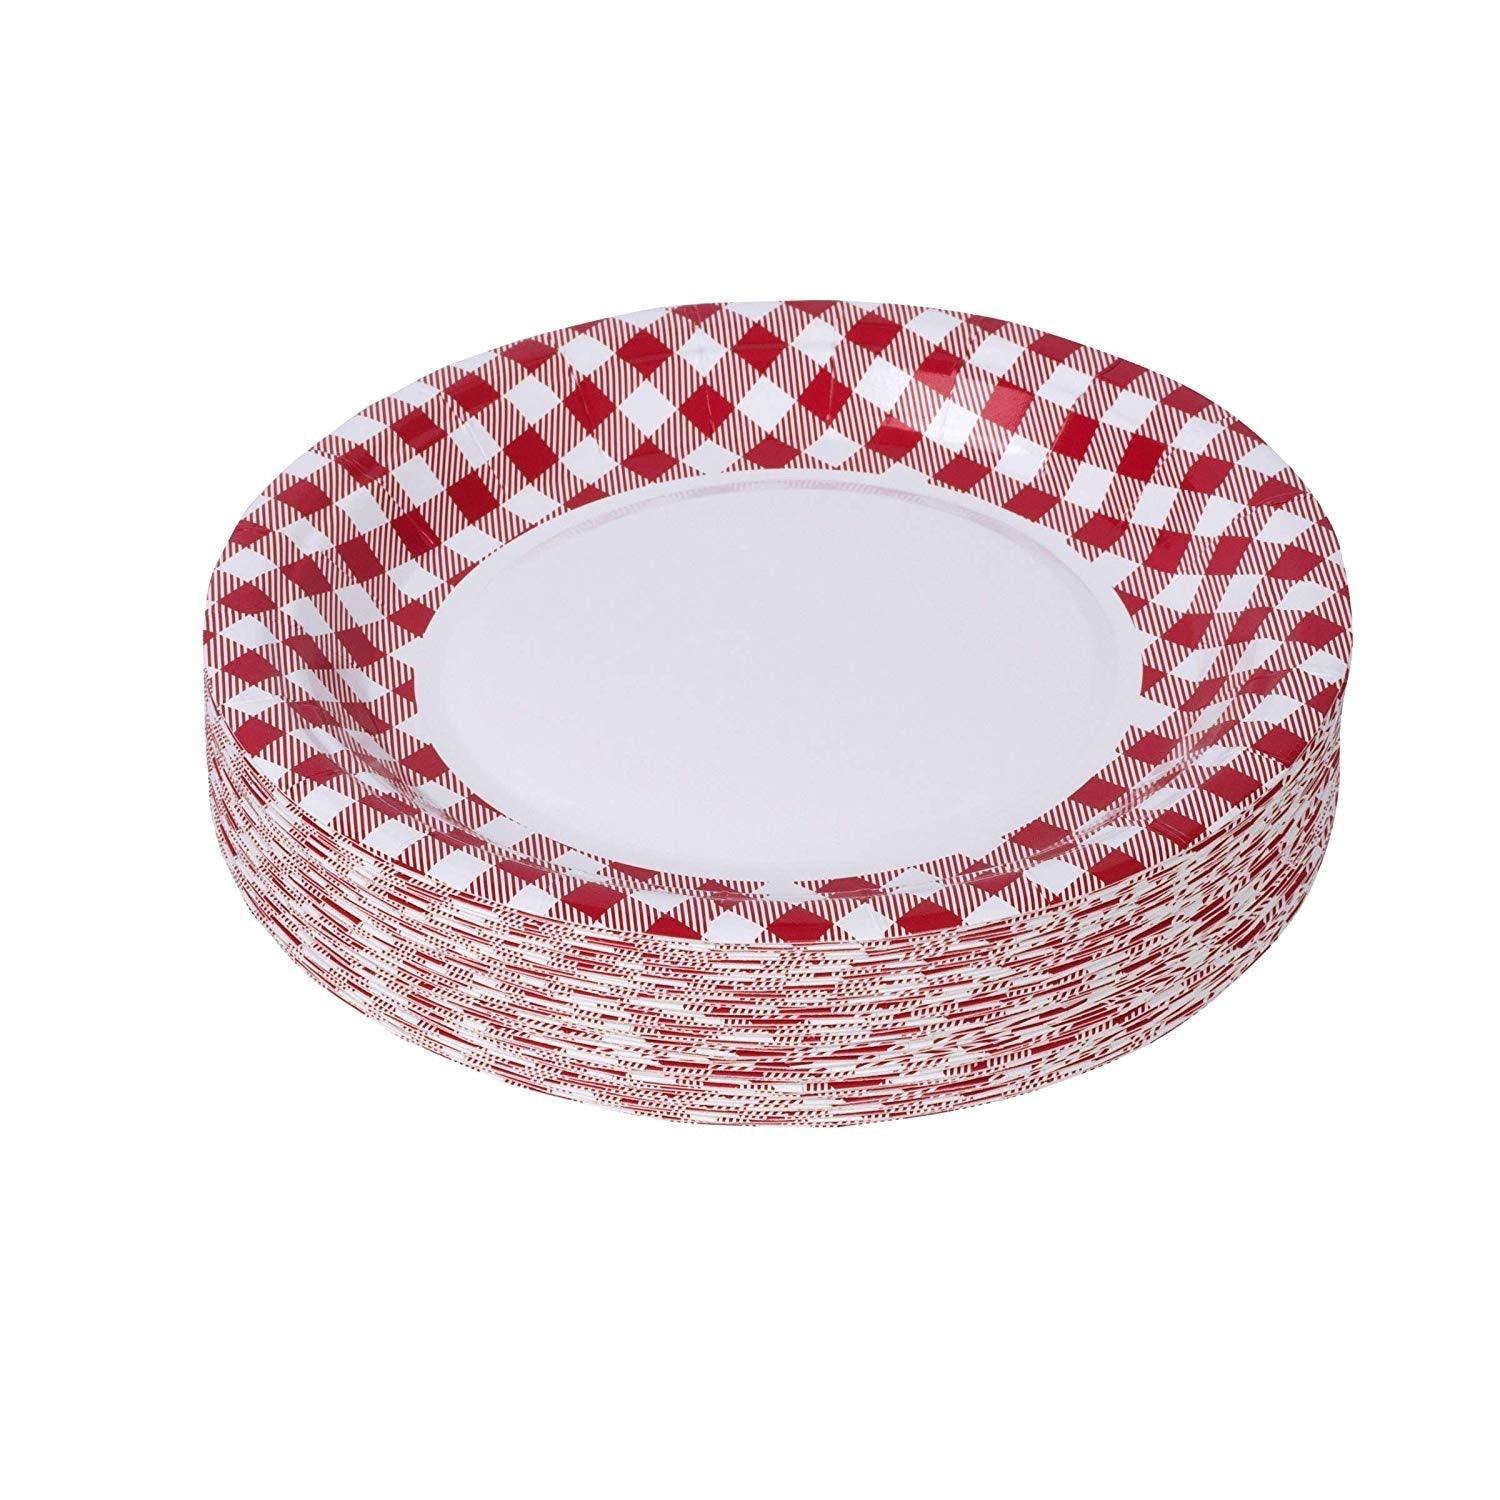 Picnic Themed 7" Disposable Round Paper Plates 100 Pack | Amazing Pinatas 